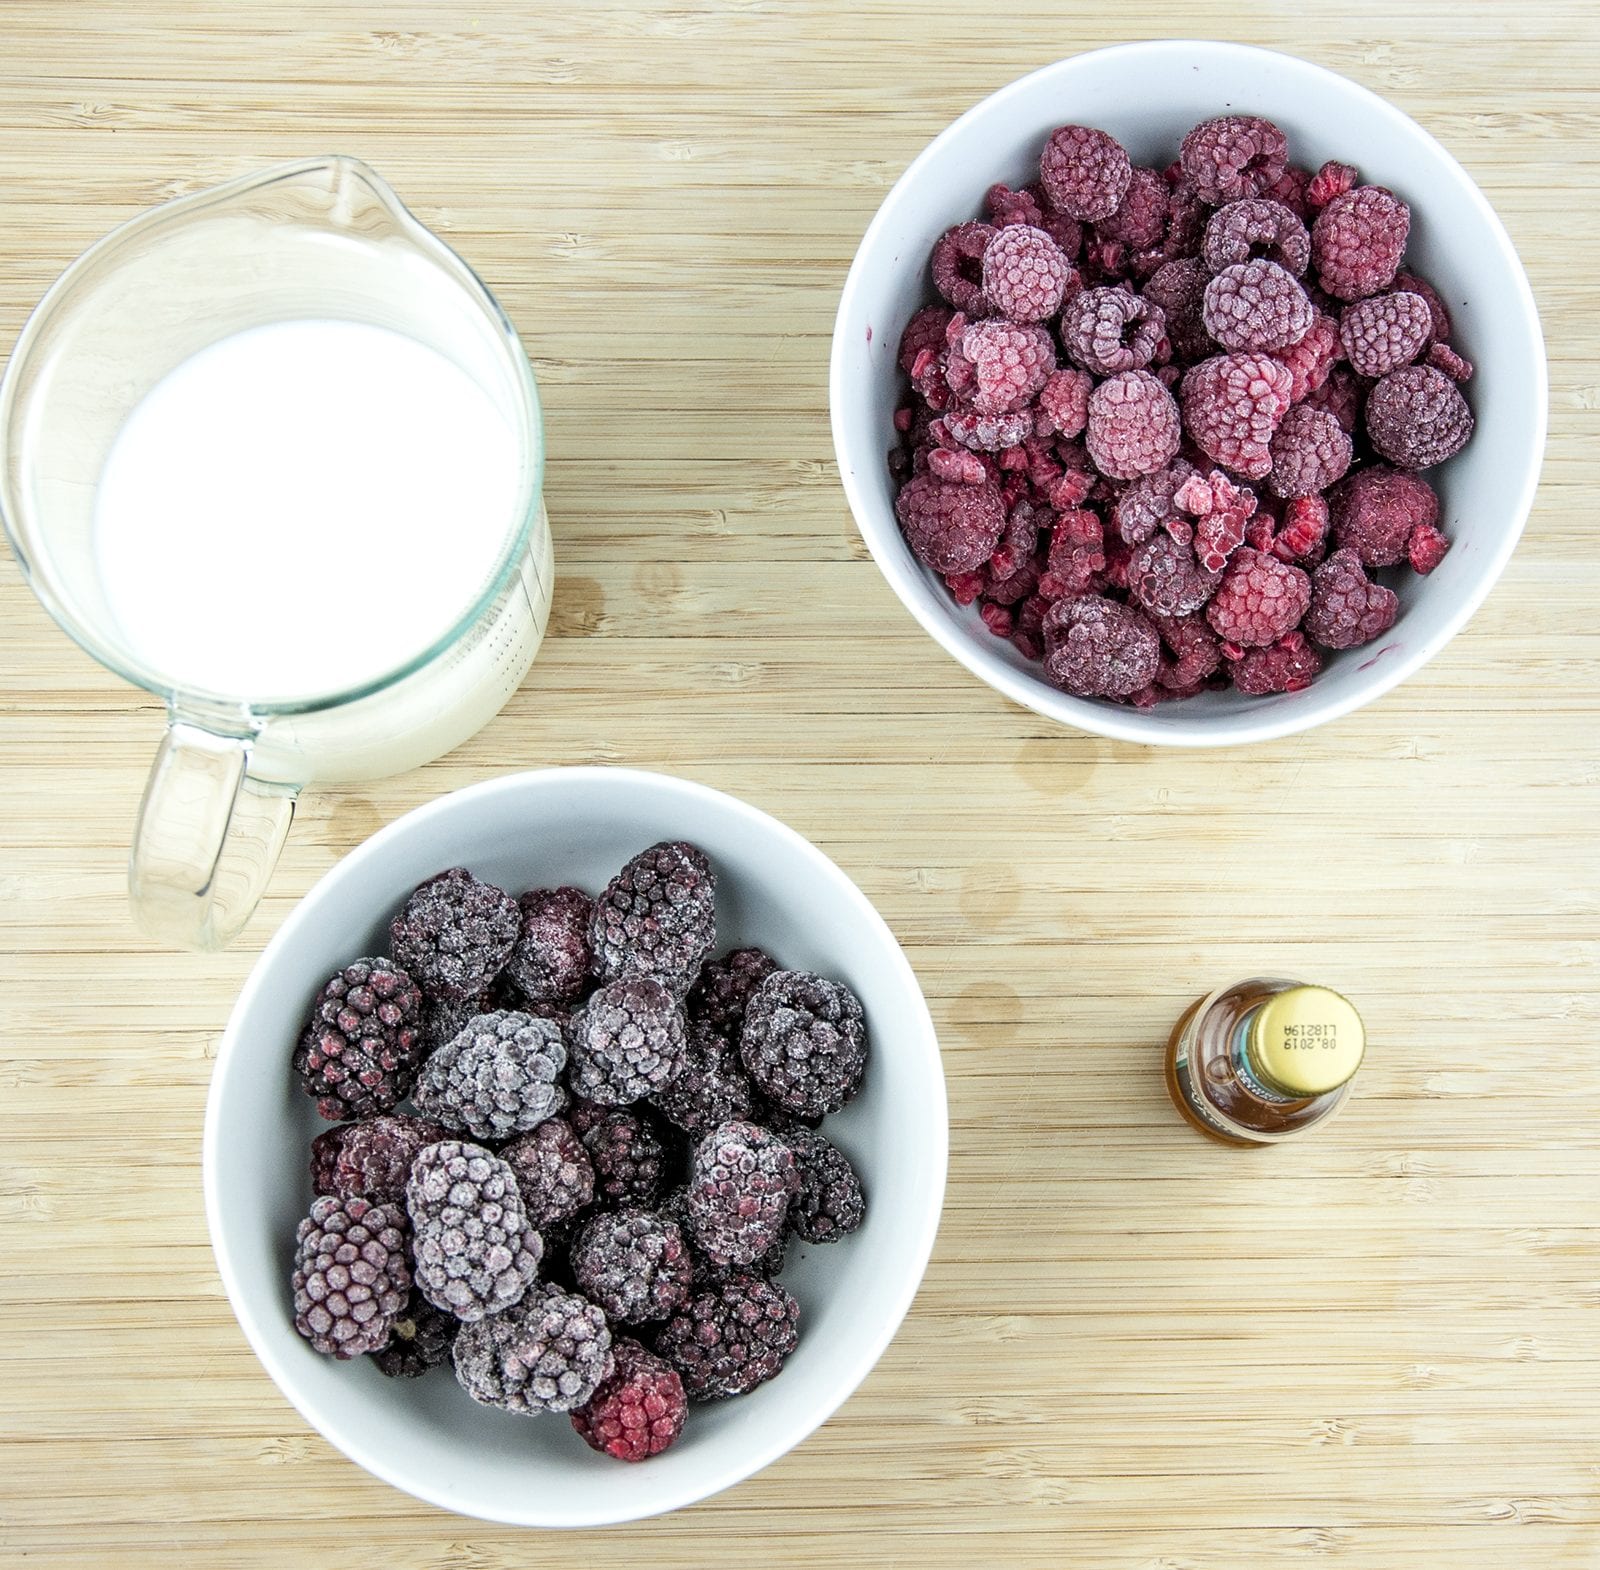 This blackberry and raspberry smoothie is a very tasty and healthy smoothie. Just 4 ingredients. Blackberries, raspberries, milk, and vanilla essence. It takes no time to make and at 130 calories a serving you can't go wrong! Yum! | theyumyumclub.com